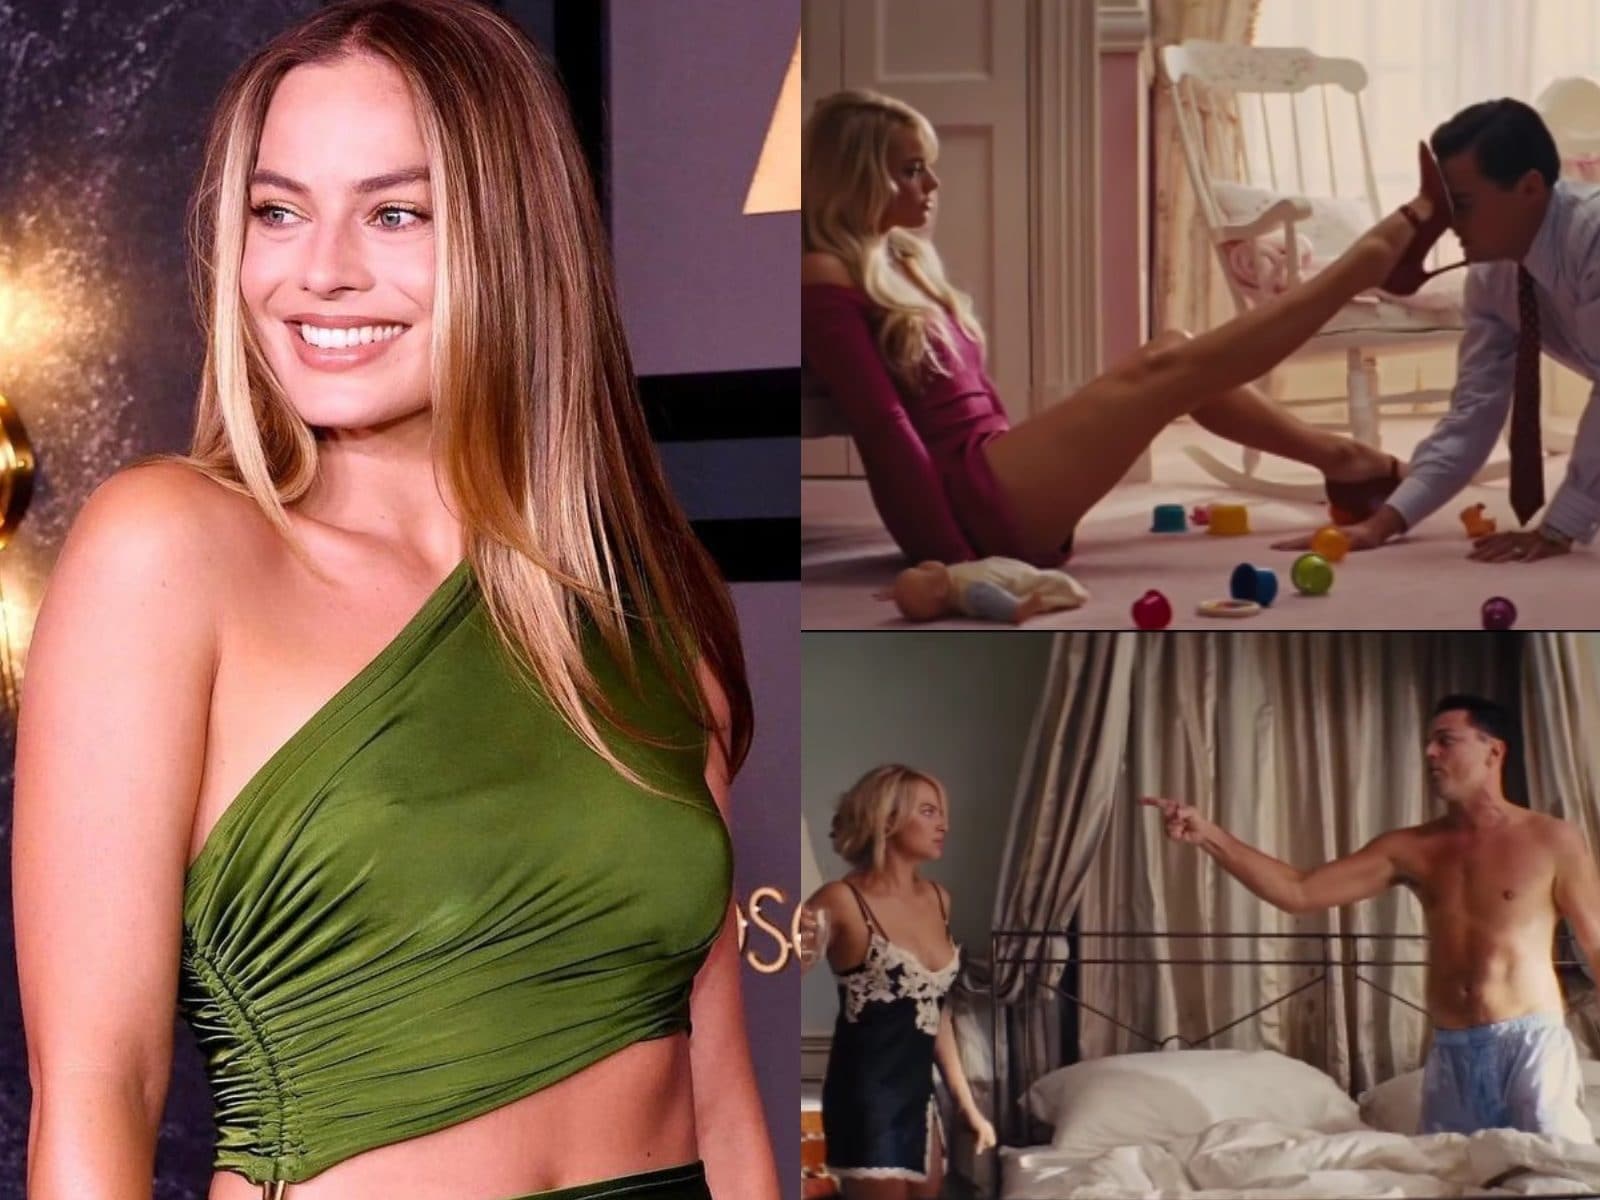 azman jalil recommends margot robbie nude scene pic